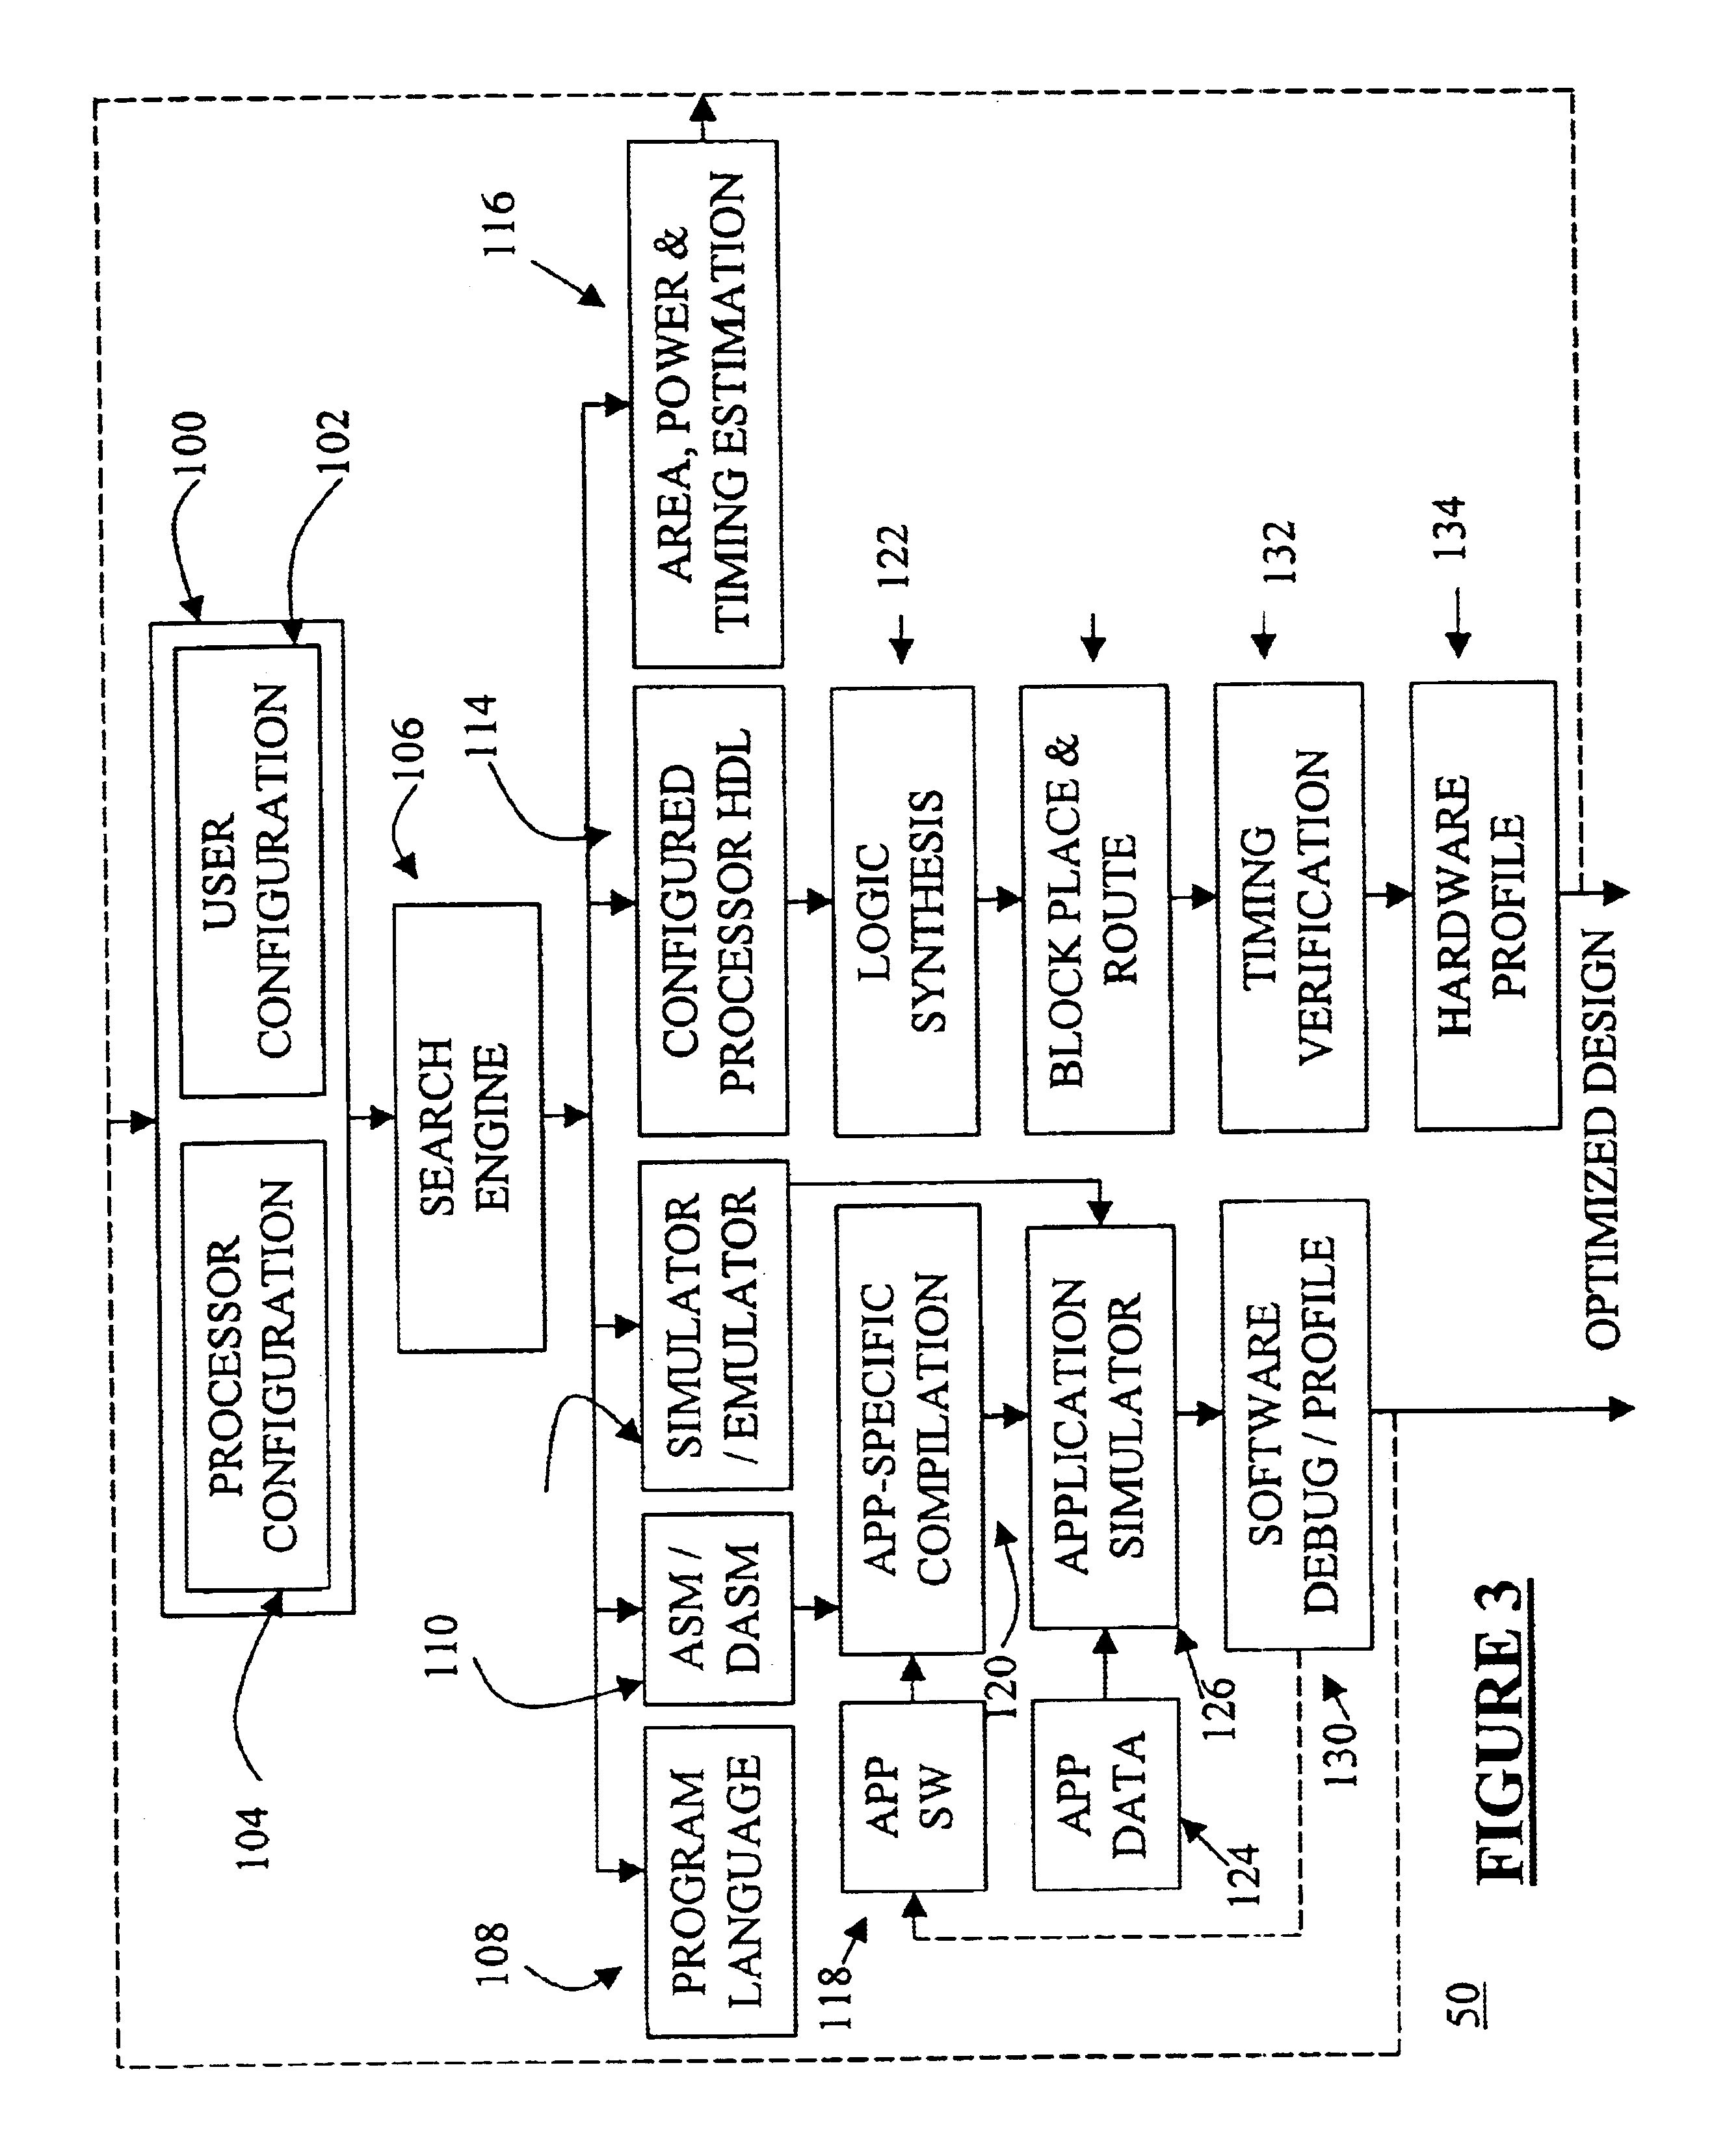 Abstraction of configurable processor functionality for operating systems portability